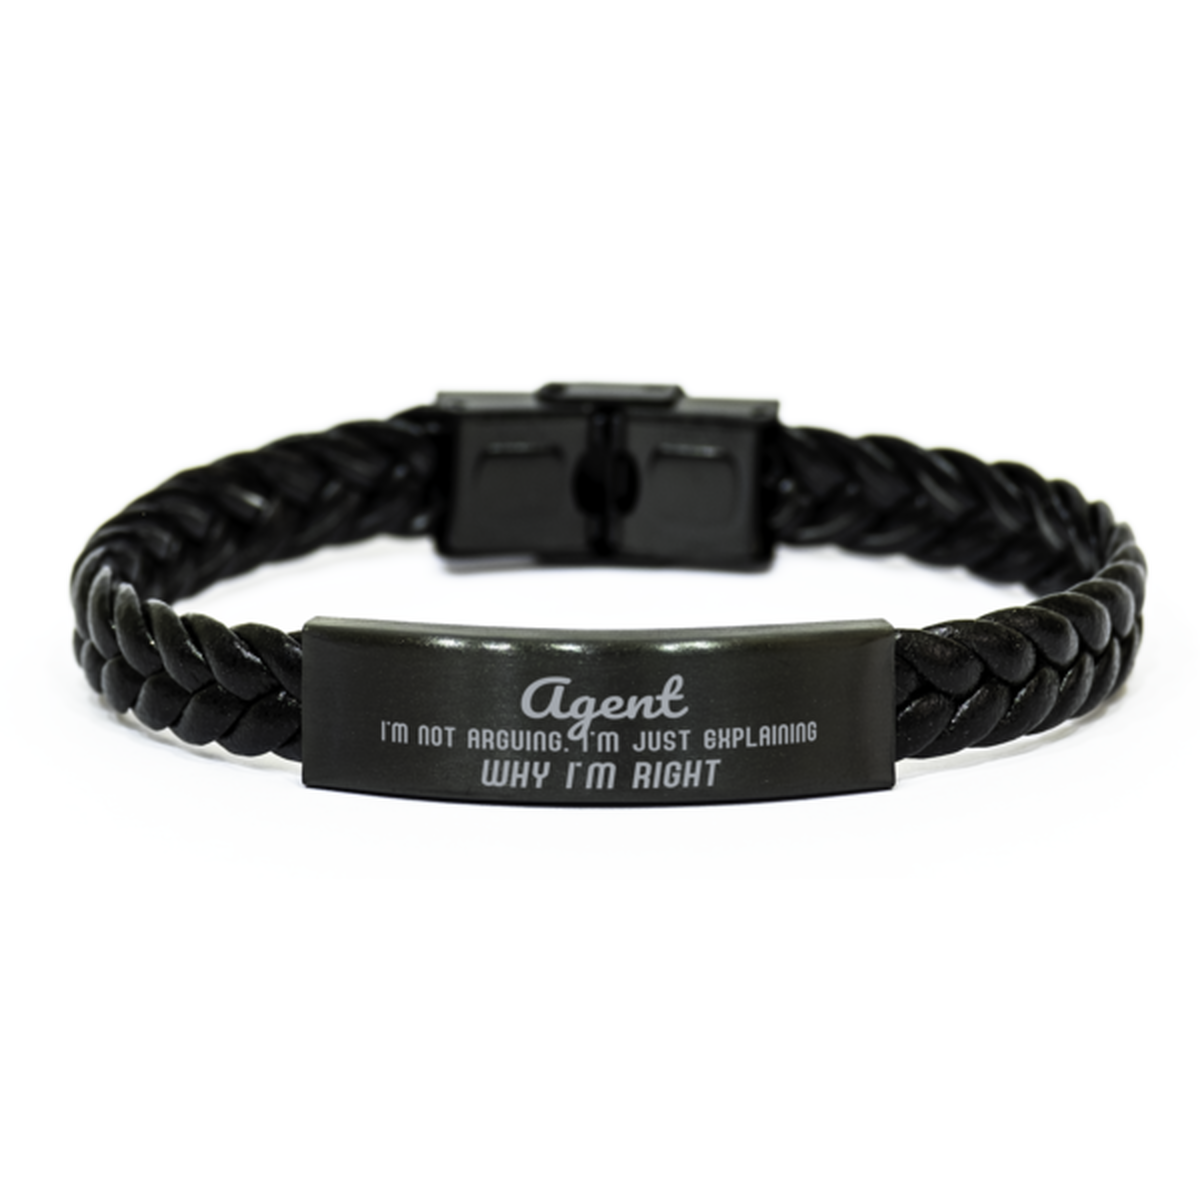 Agent I'm not Arguing. I'm Just Explaining Why I'm RIGHT Braided Leather Bracelet, Graduation Birthday Christmas Agent Gifts For Agent Funny Saying Quote Present for Men Women Coworker